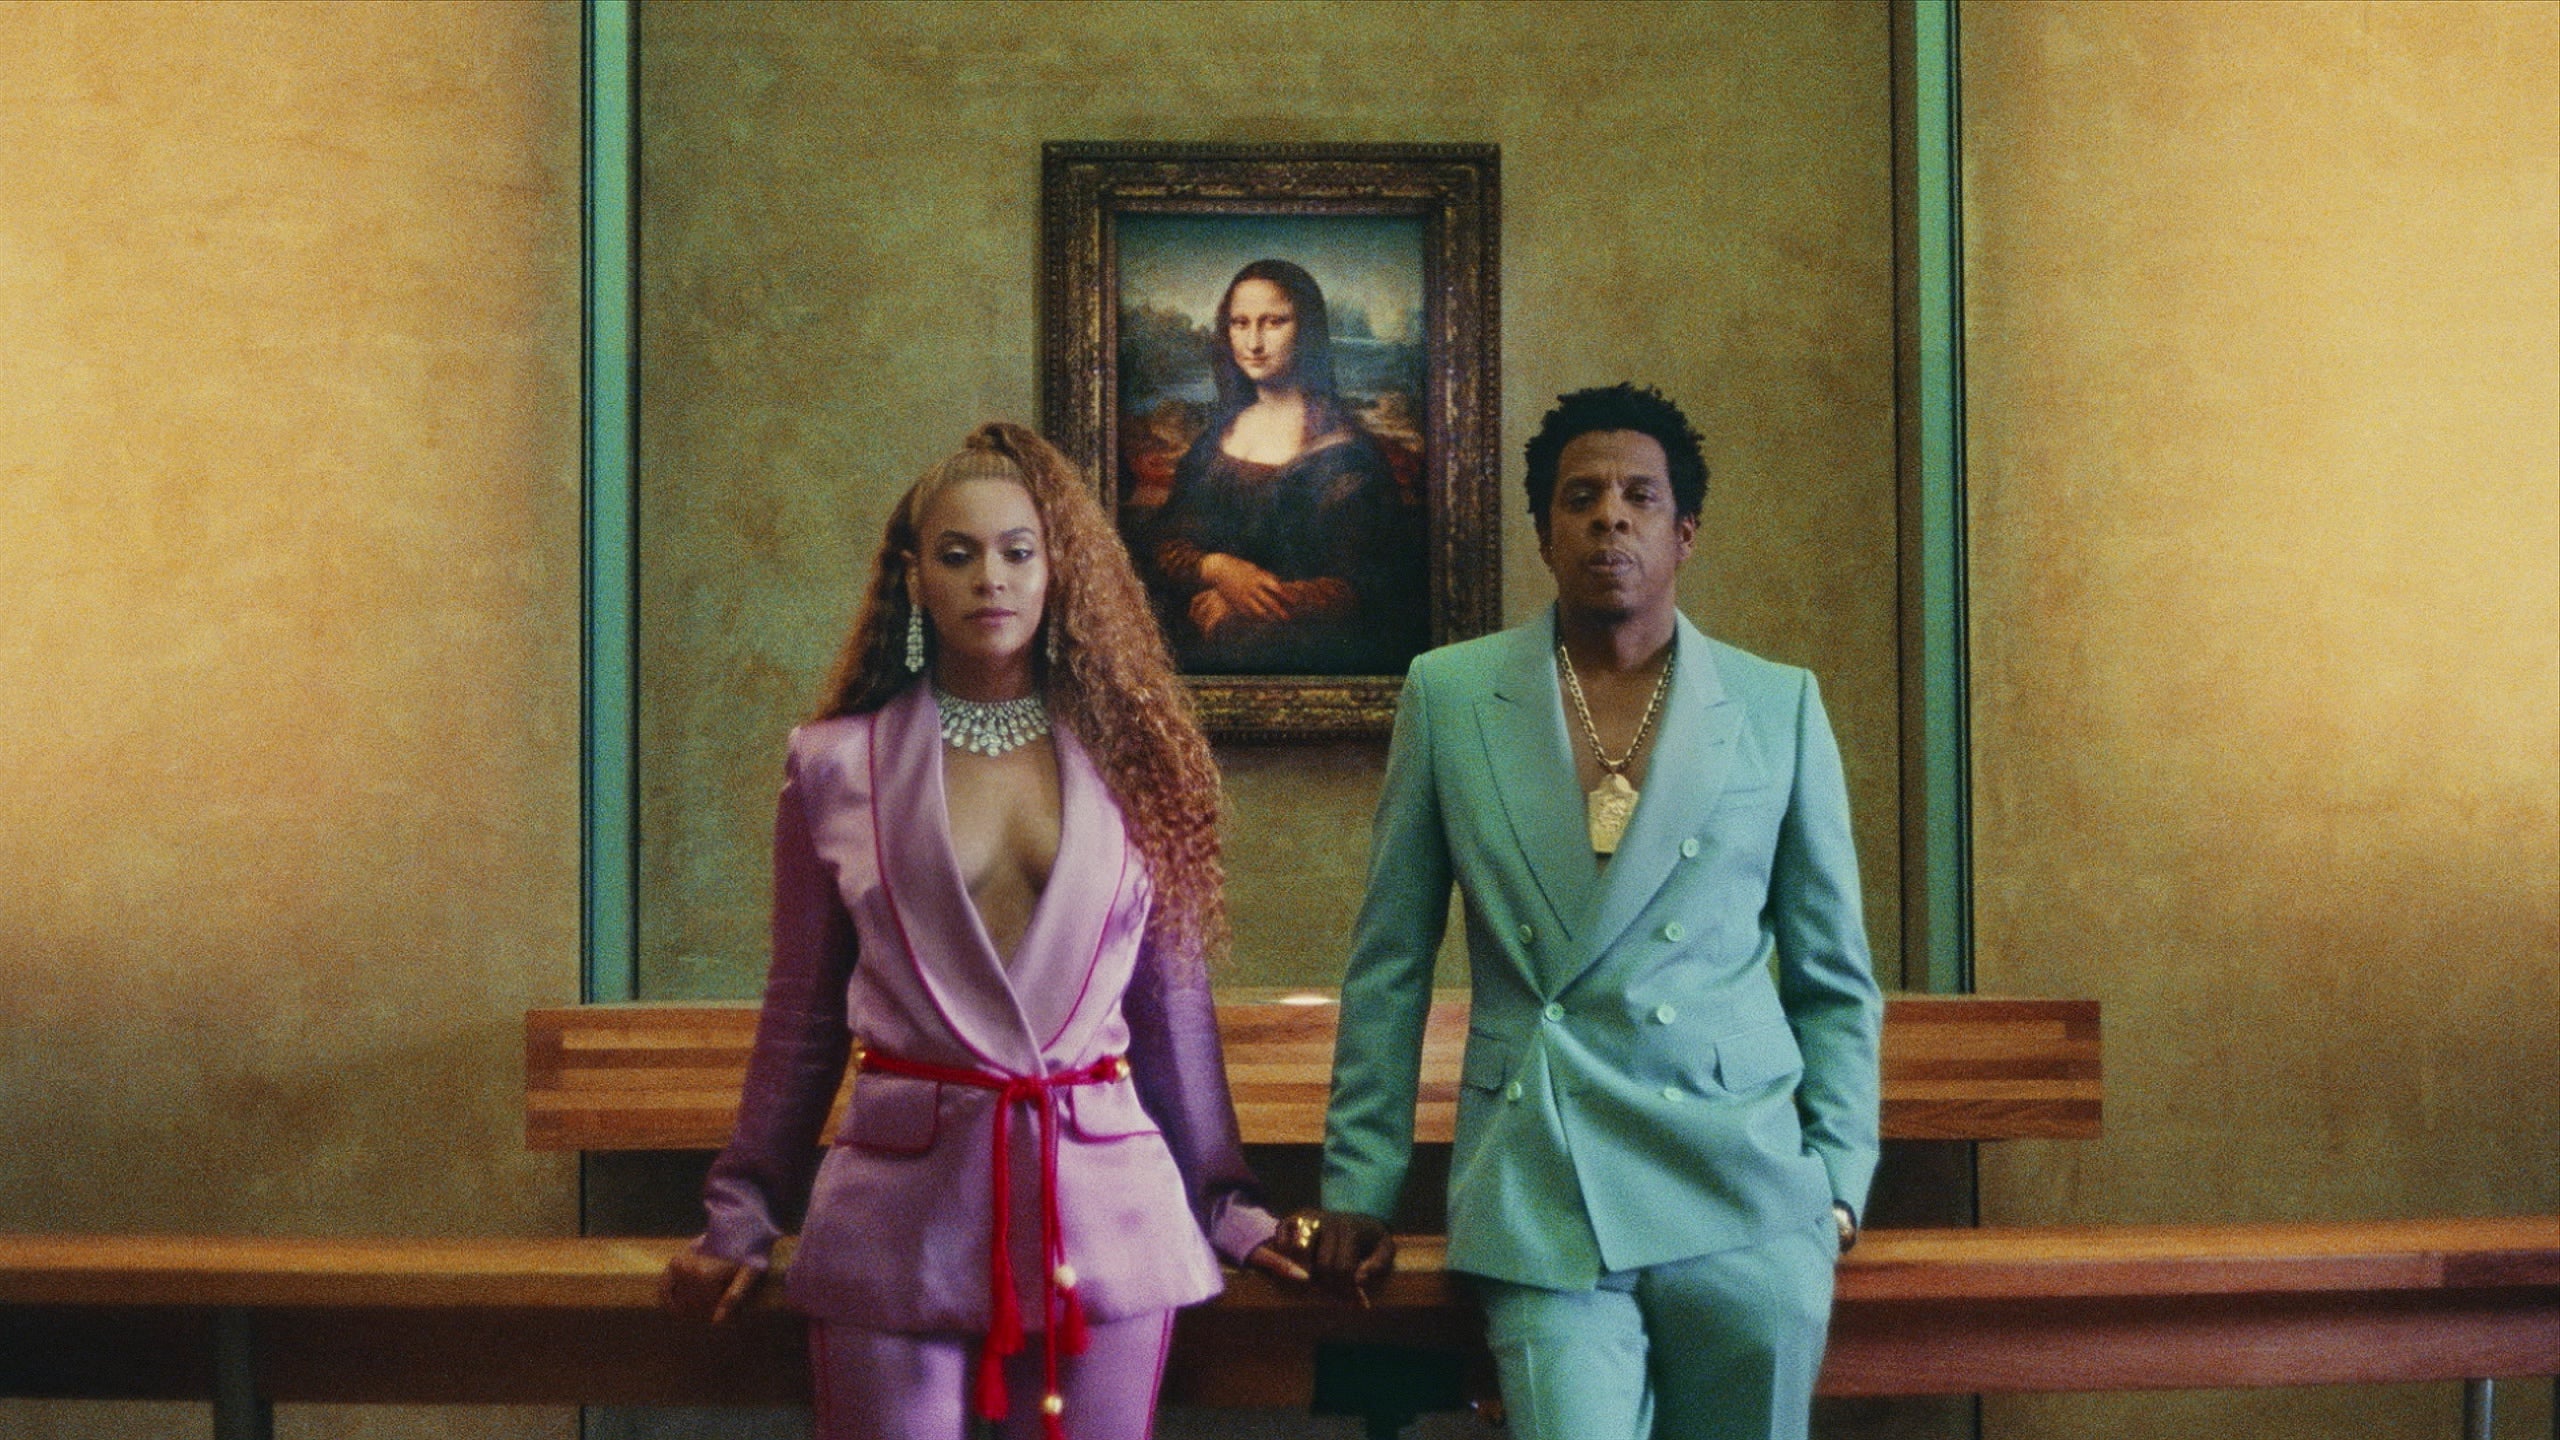 The Quick Read: Jay-Z And Beyoncé Are A Billion-Dollar Couple
